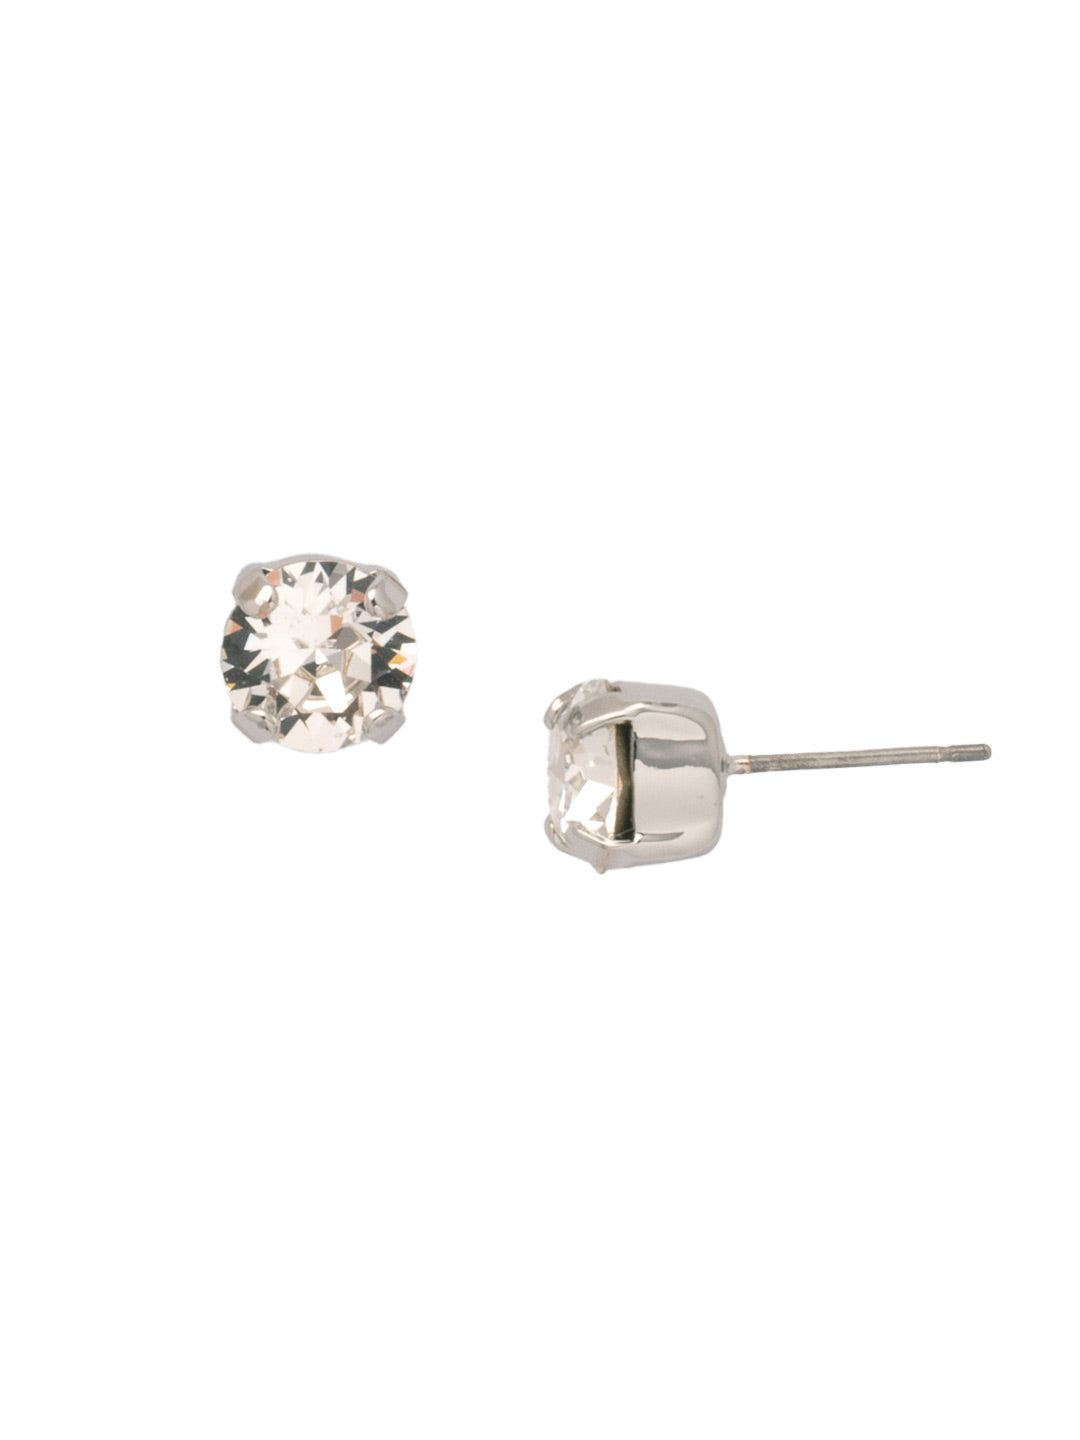 Simple Stud Earrings - EFC99PDCRY - <p>The Simple Stud Earrings feature a single solid crystal on a surgical steel post, creating a small but sparkly everyday staple! Need help picking a stud? <a href="https://www.sorrelli.com/blogs/sisterhood/round-stud-earrings-101-a-rundown-of-sizes-styles-and-sparkle">Check out our size guide!</a> From Sorrelli's Crystal collection in our Palladium finish.</p>